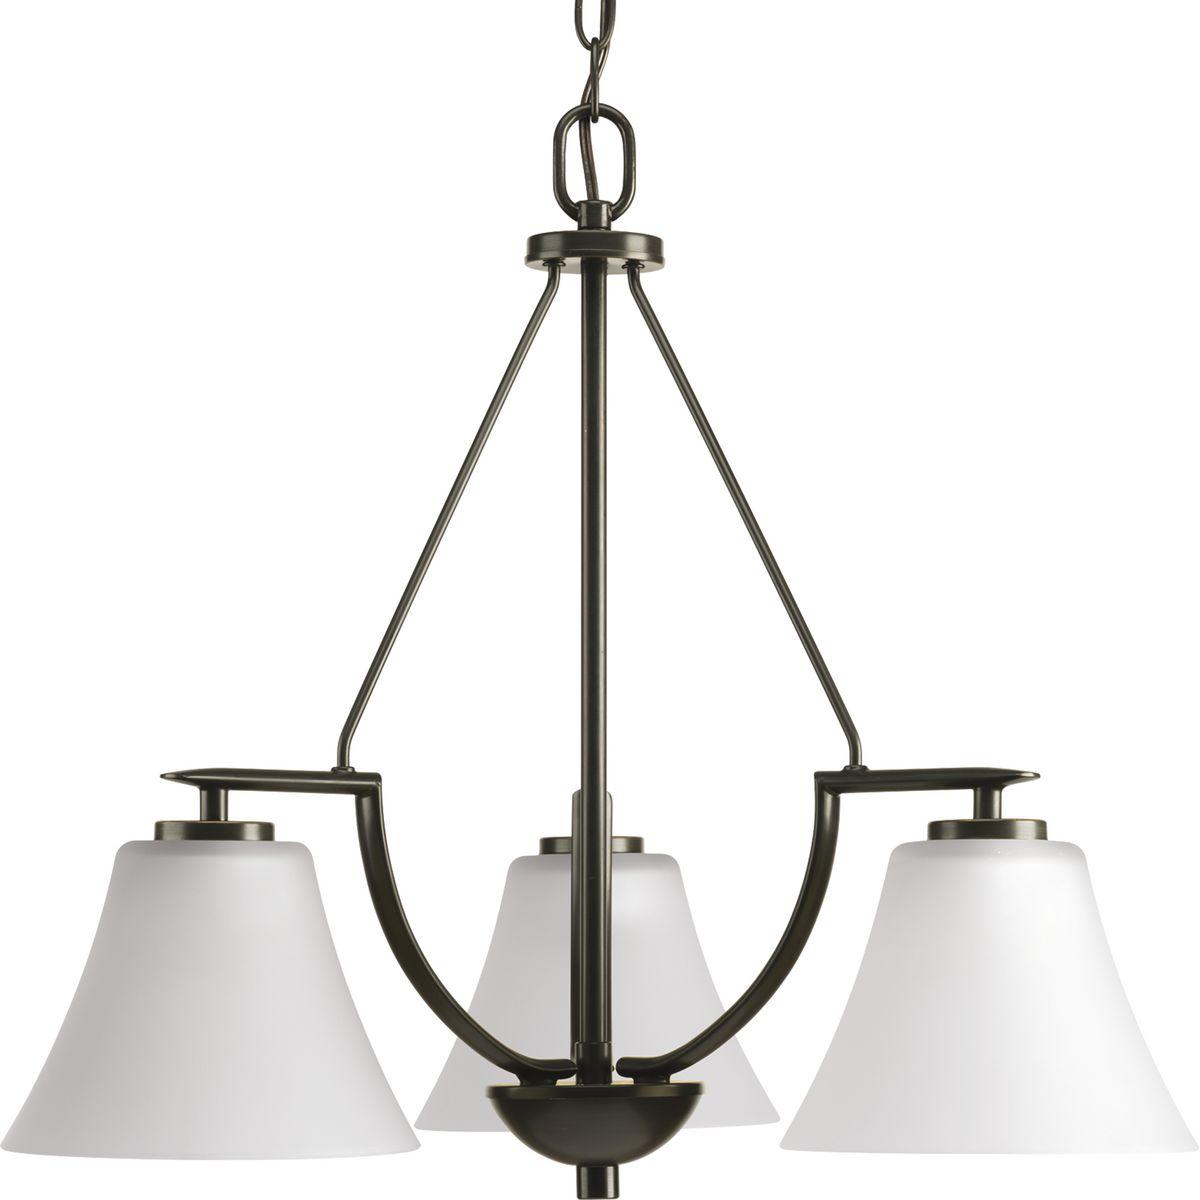 Hubbell P4621-20W Three-light chandelier with white etched glass from the Bravo collection. Linear elements stream throughout the fixture to compose a relaxed but exotic ambiance. Generously scaled glass shades add distinction against the Antique Bronze finish and provide 